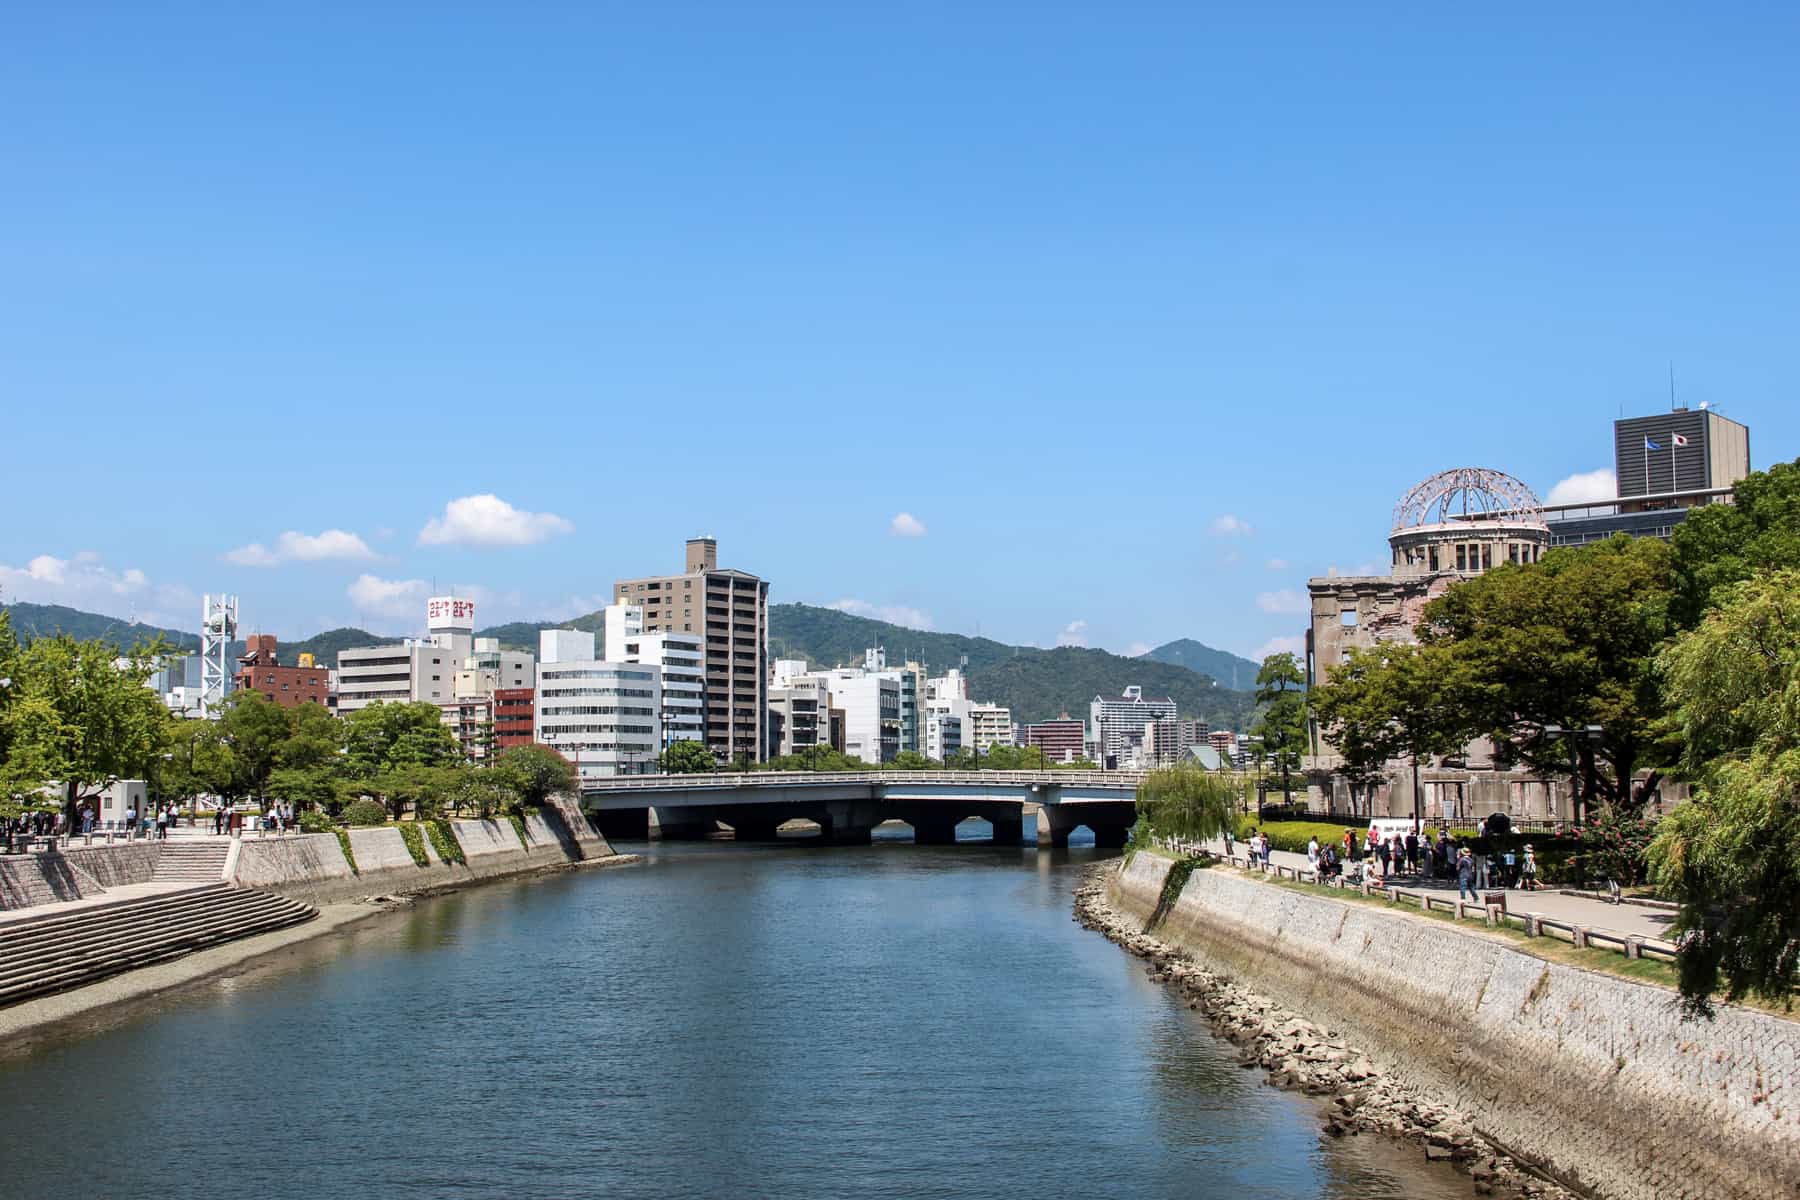 A river bridge connecting Hiroshima modern city with the A-Bomb Dome site the Peace Park Memorial.